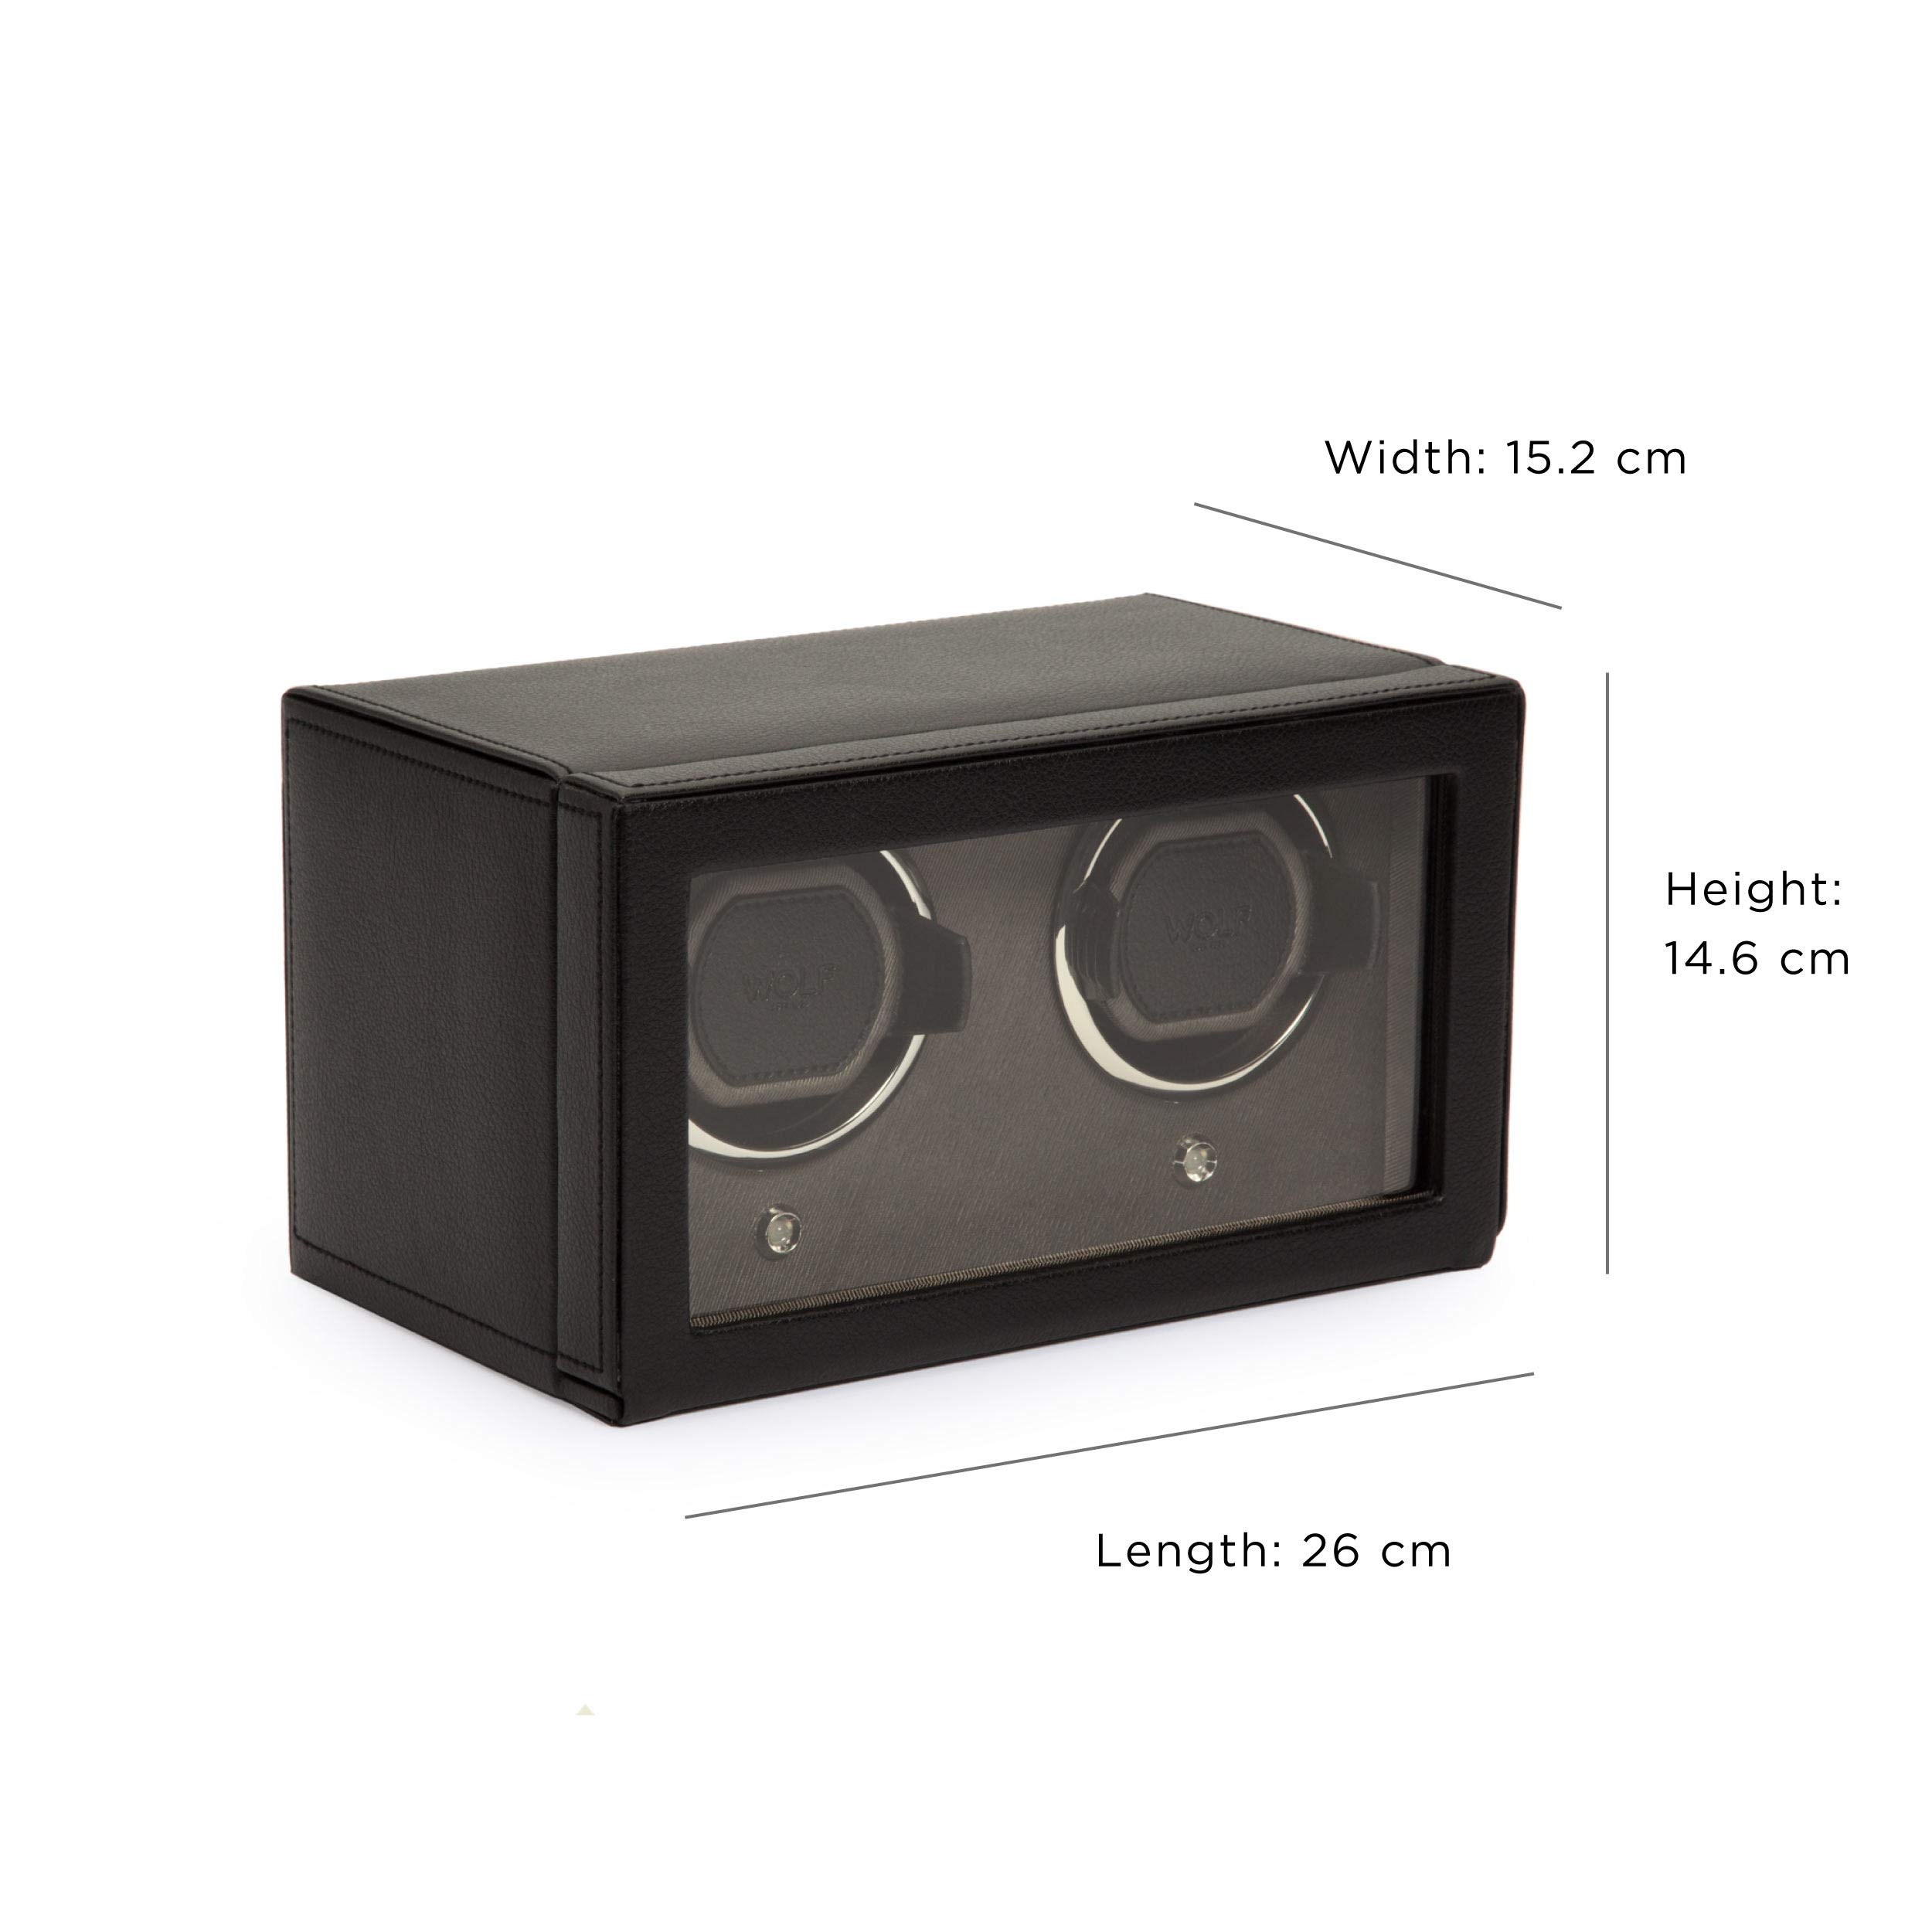 WOLF Unisex 461203 Wolf Cub Double Black Analog Display Watch Winder with Cover, 6x5x5.75